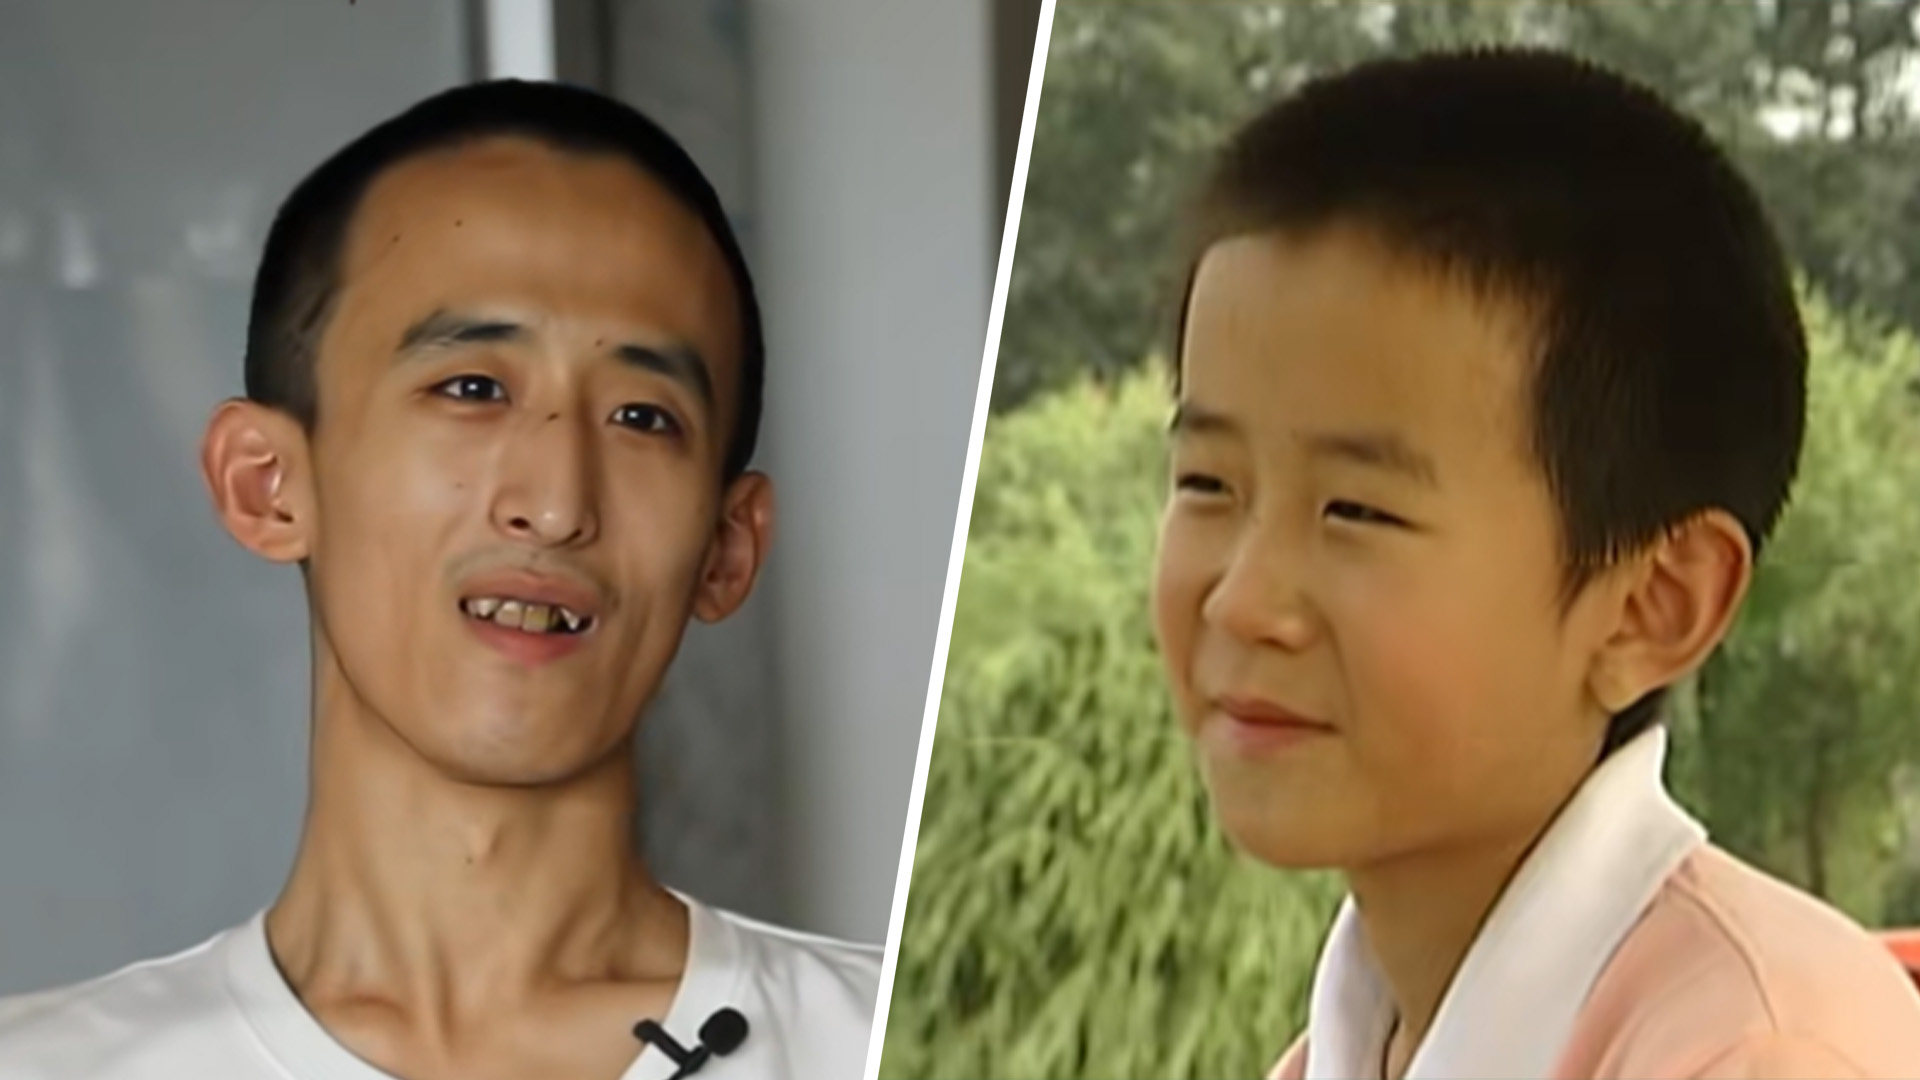 Zhang Xinyang, 28, a Chinese prodigy who won a university place at age 10, now believes “sitting around and doing nothing is the key to lifelong happiness”. Photo: SCMP composite/Douyin